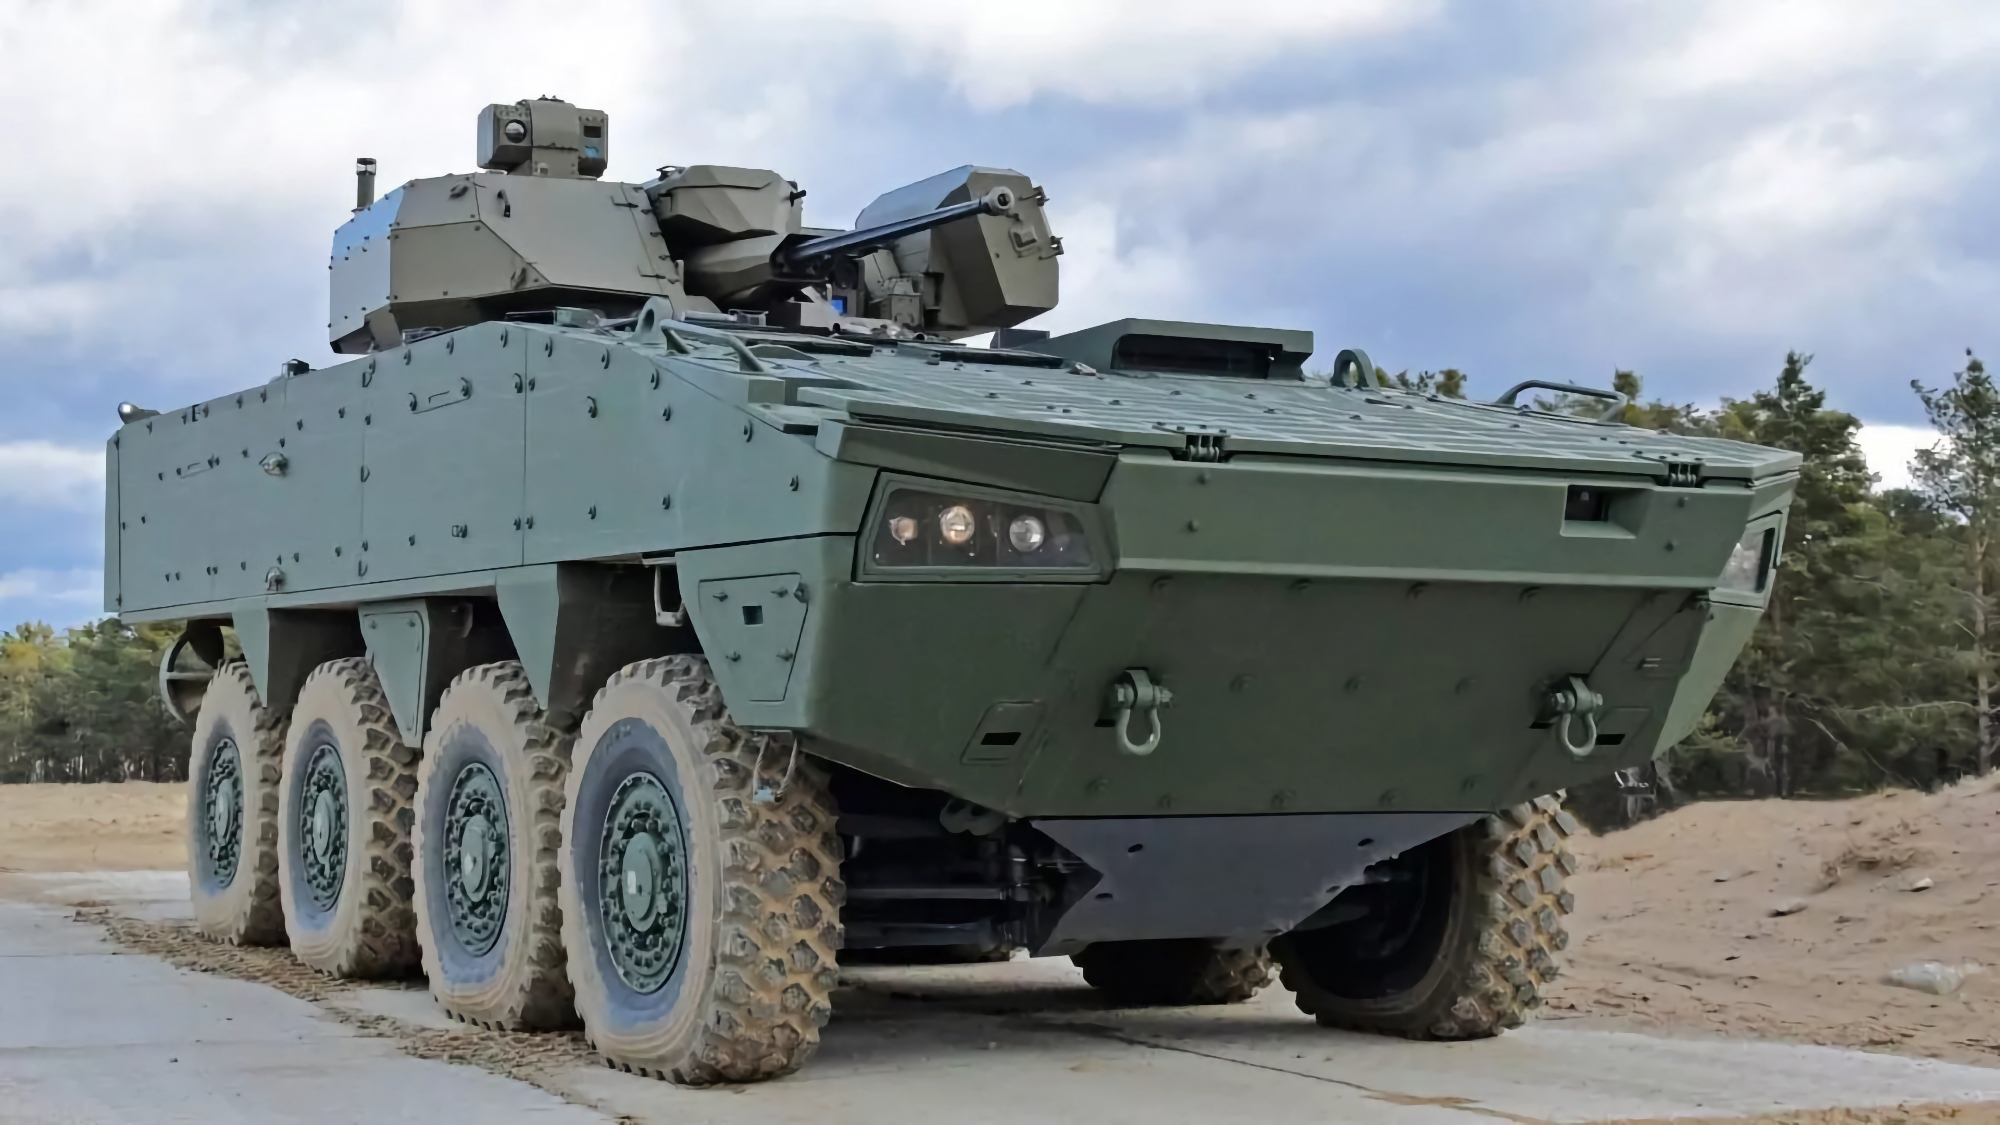 Japanese ground forces will use Finnish Patria AMV XP armored personnel carriers